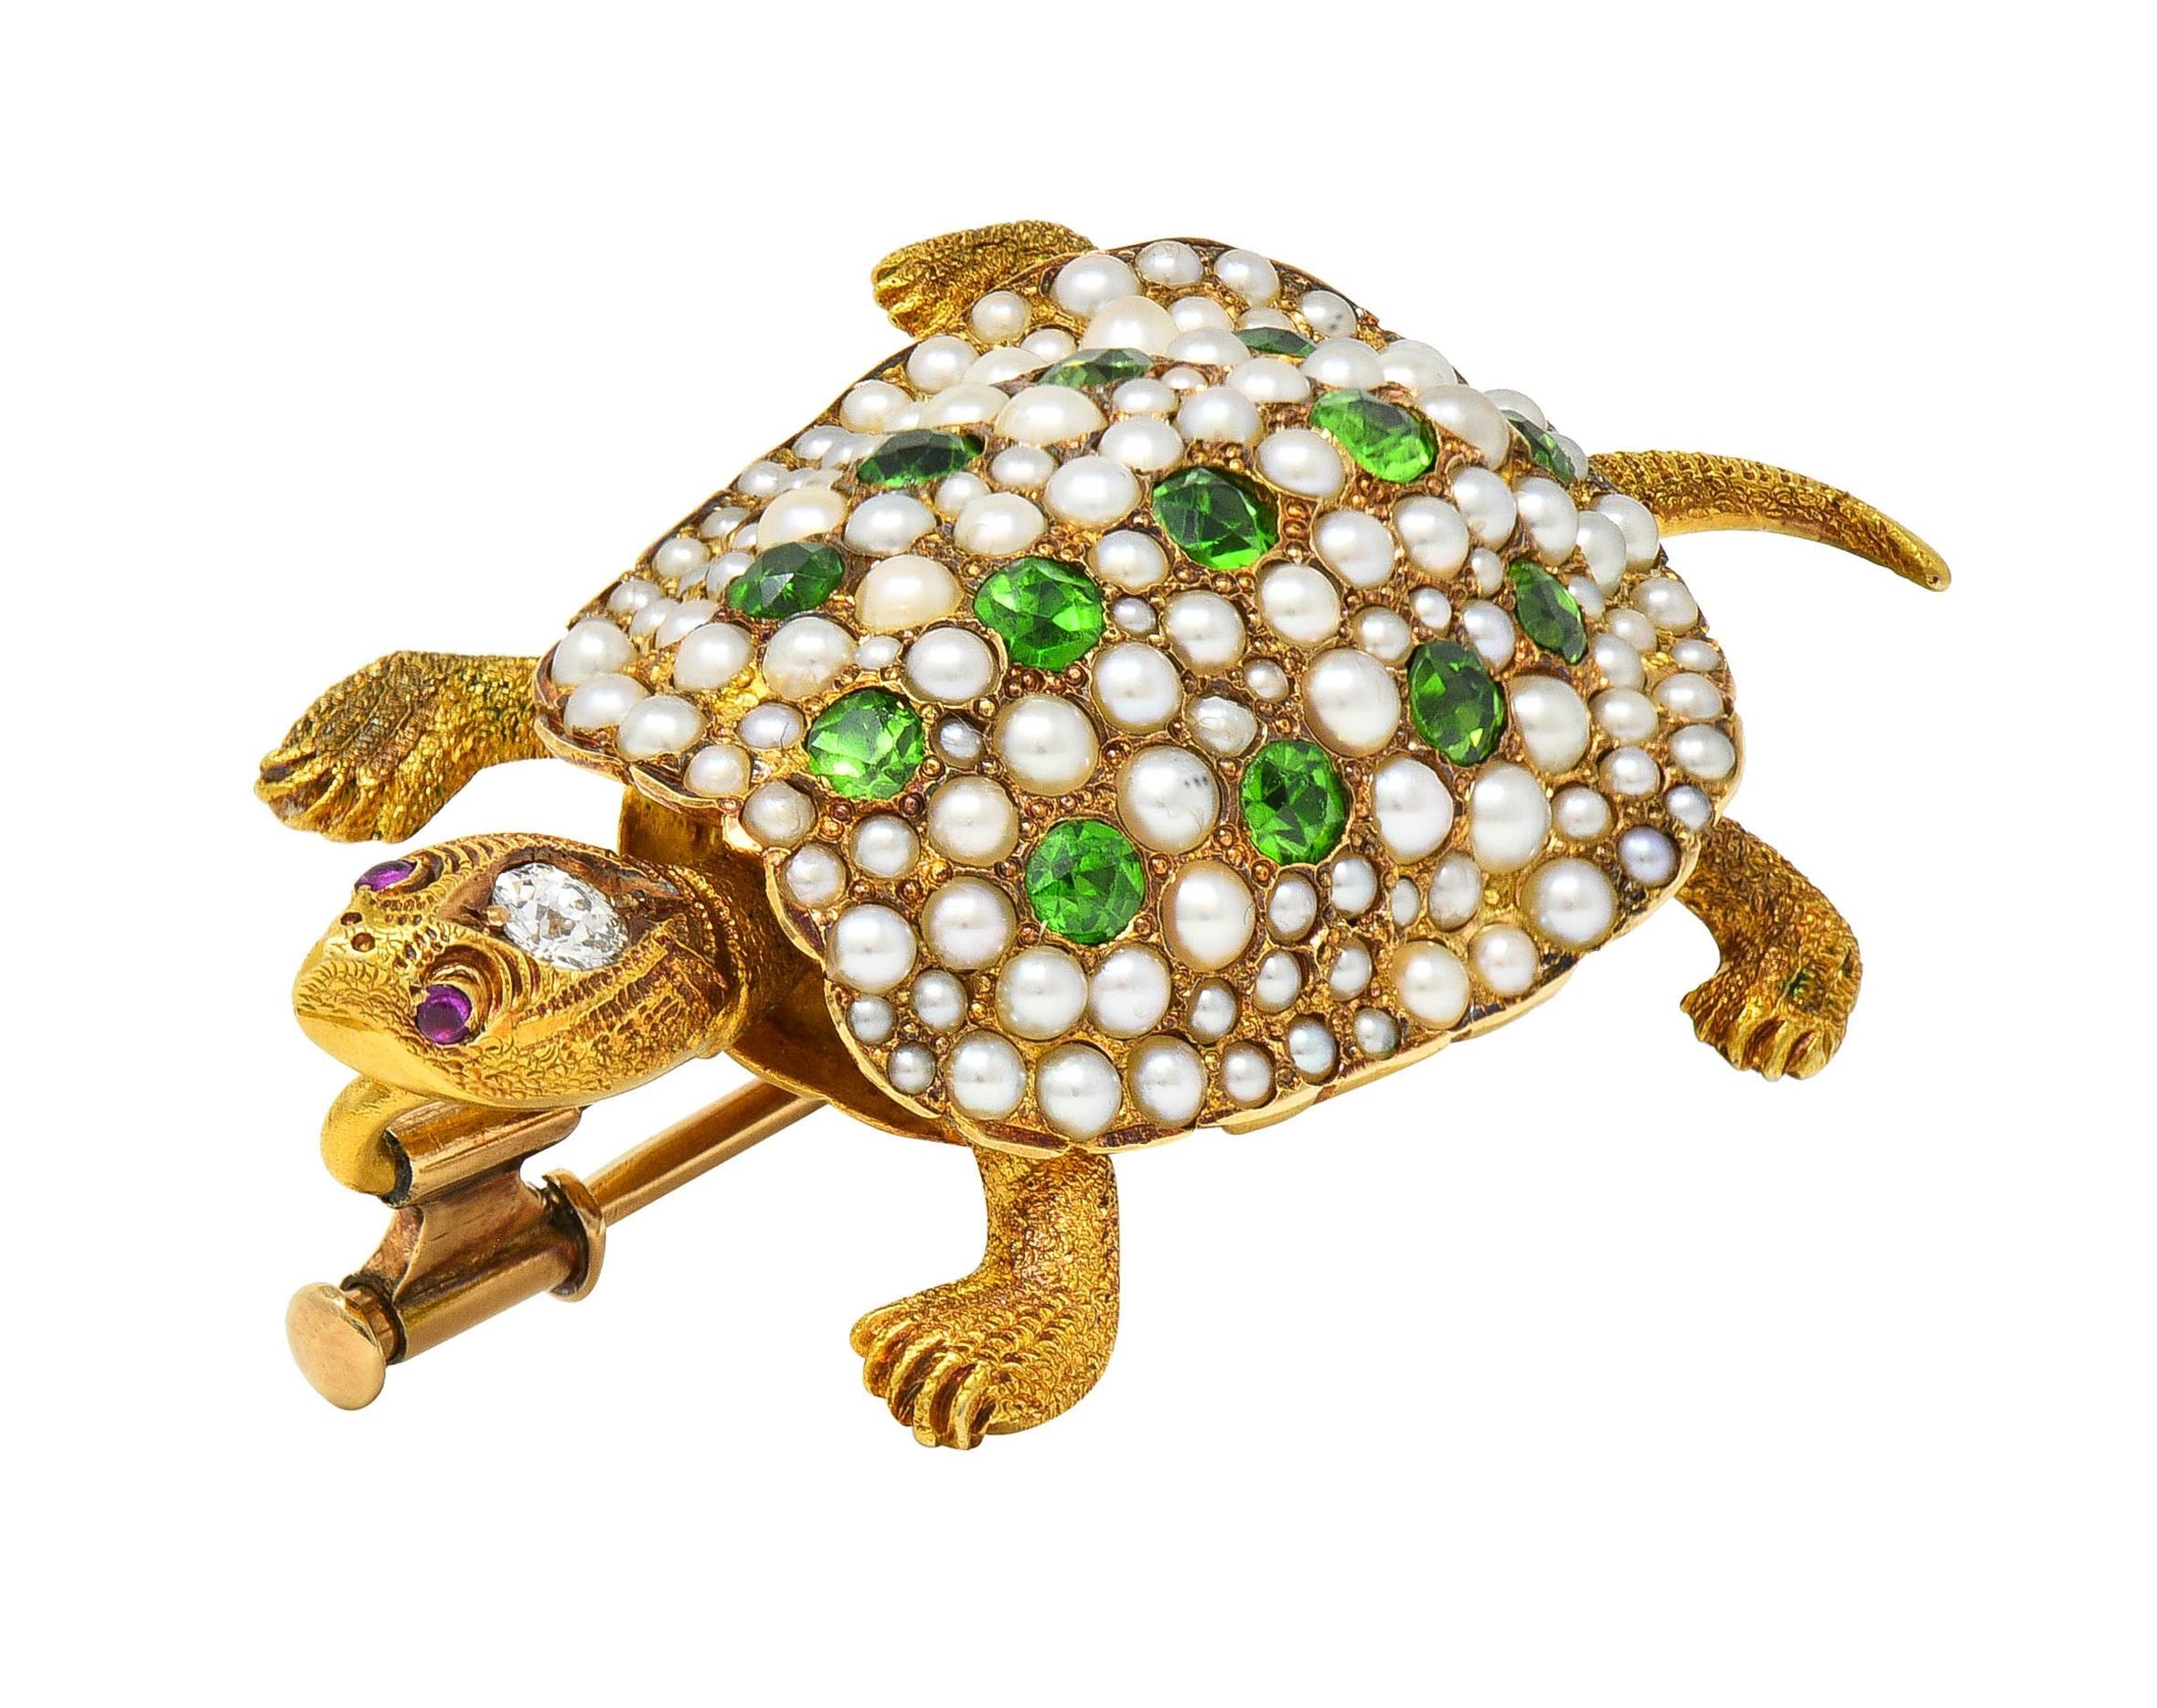 Designed as a stylized and dimensional turtle with a textured head, legs and tail 
Featuring a domed shell bead set with demantoid garnets and pearls 
Demantoid garnets are round cut and weigh approximately 0.58 carat total
Transparent bright medium